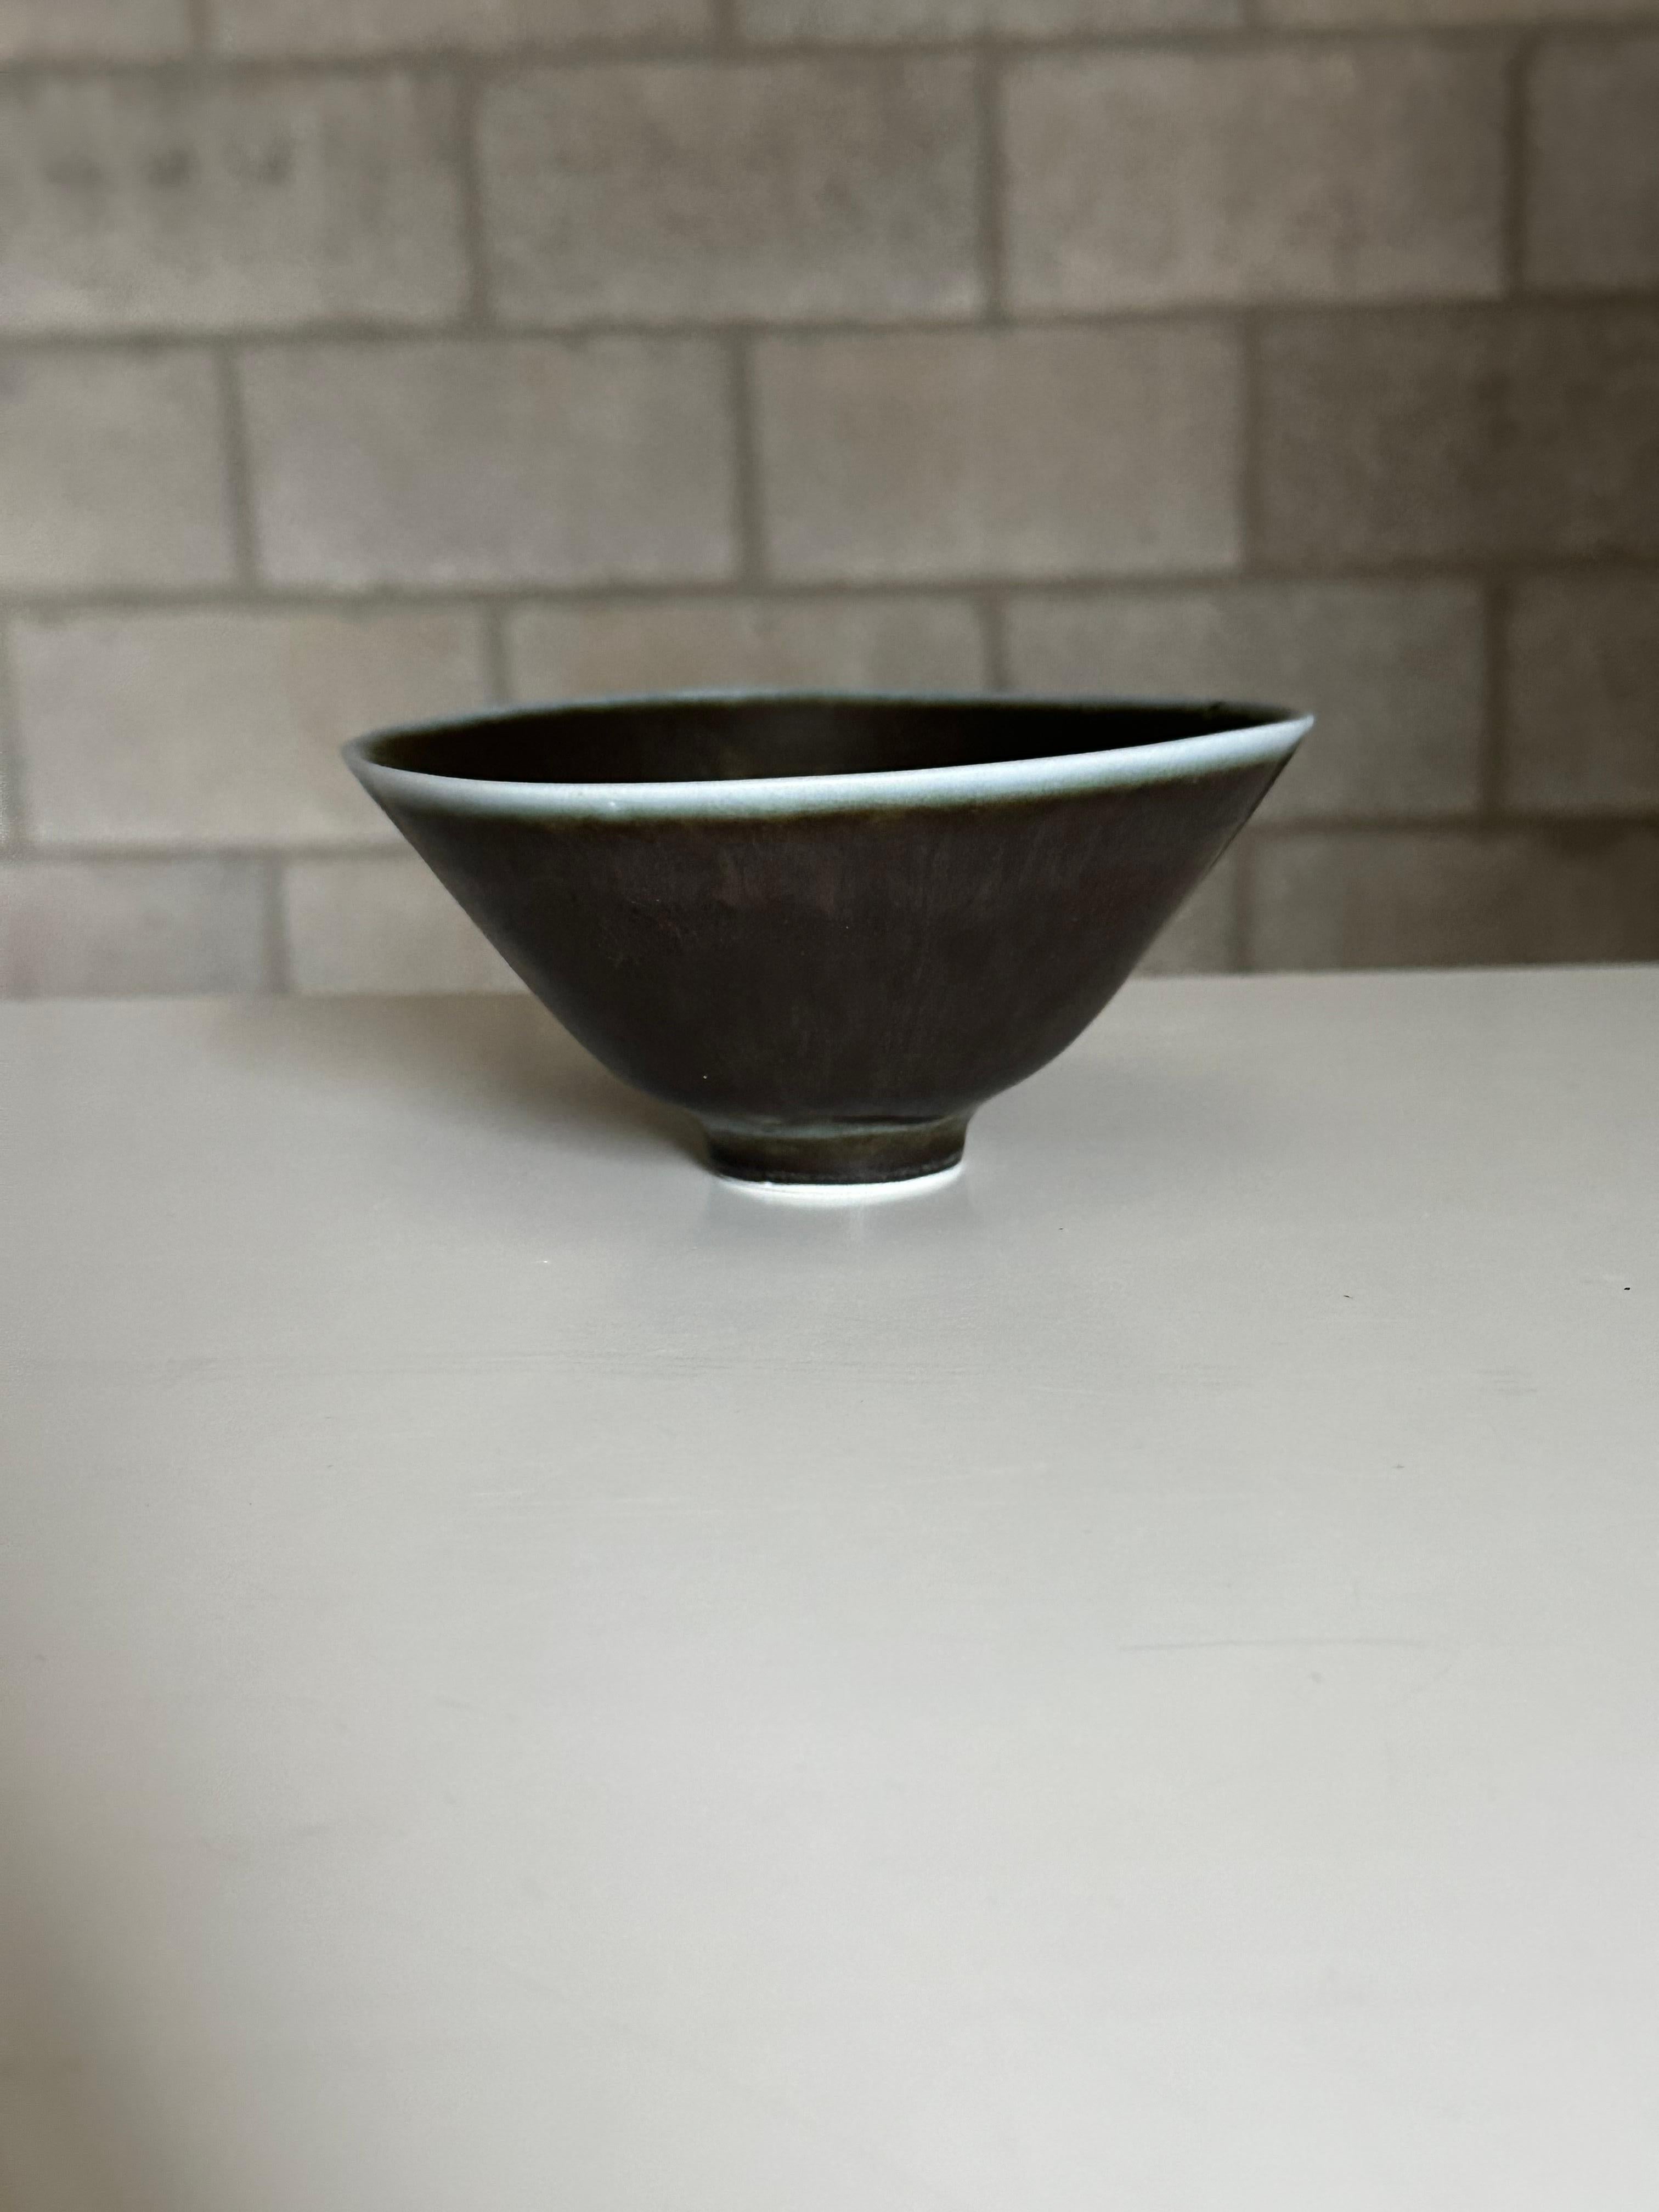 A charming bowl designed by Carl Harry Stålhane for Rörstrand. Bowl features a grayish blue body with an off white rim, some hues to brown. A very attractive color and shape- closer to the rim the bowl the shape begins to approach that of a rounded